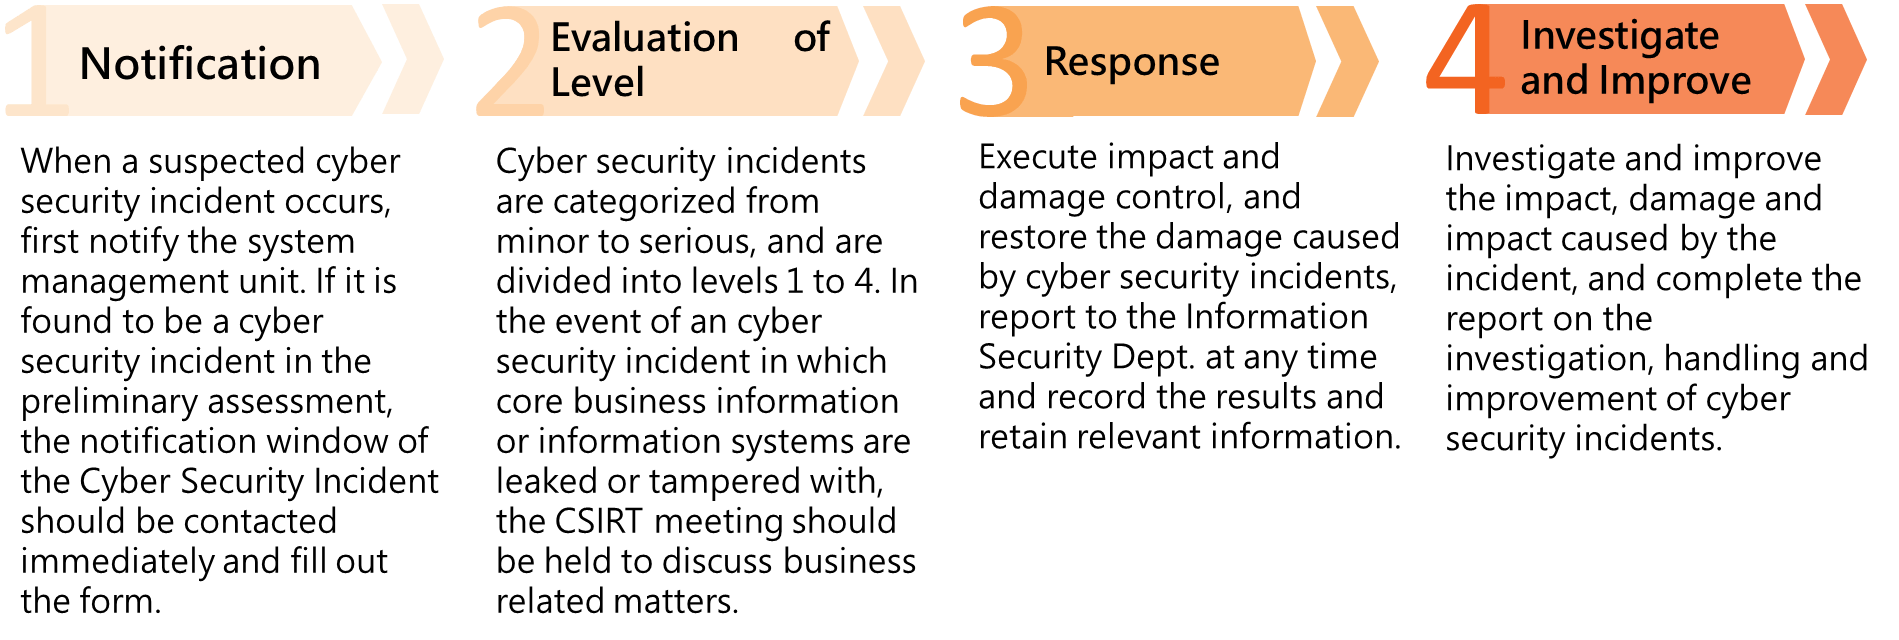 Cyber Security Incident Notification and Emergency Response Management Procedure